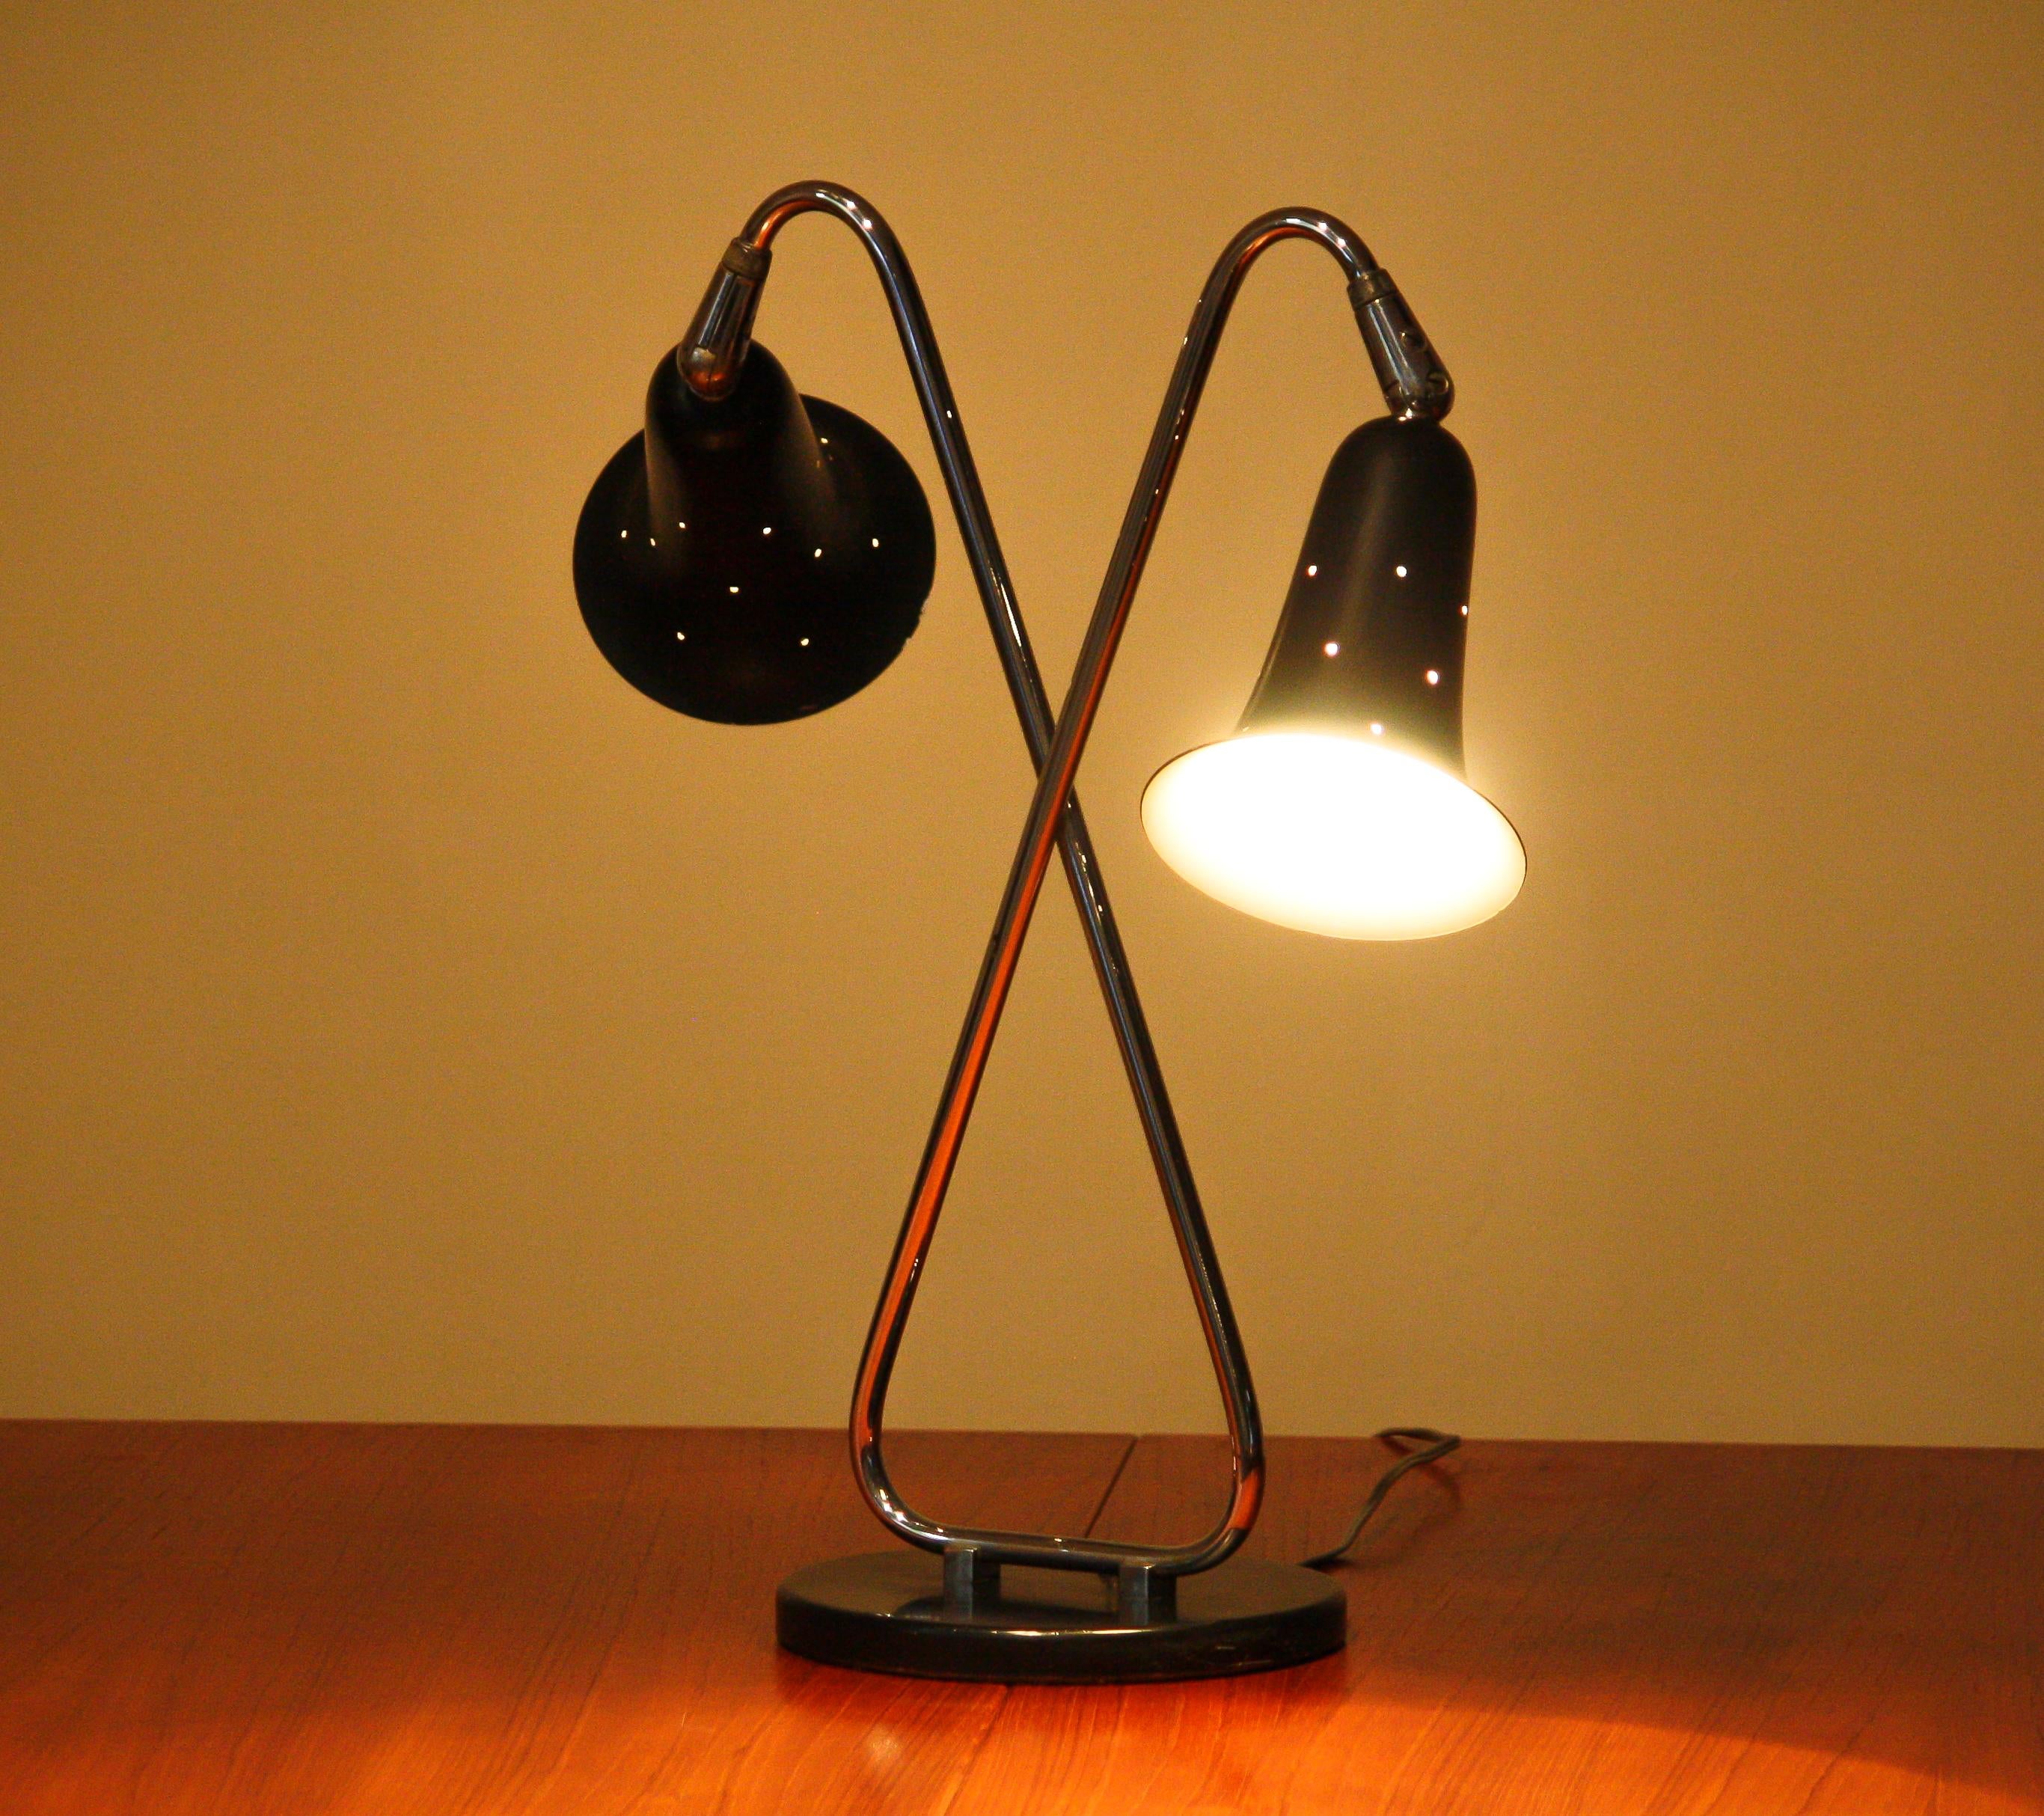 Mid-20th Century 1950s Metal Black Lacquered and Chromed Desk / Table Lamp Made in the USA